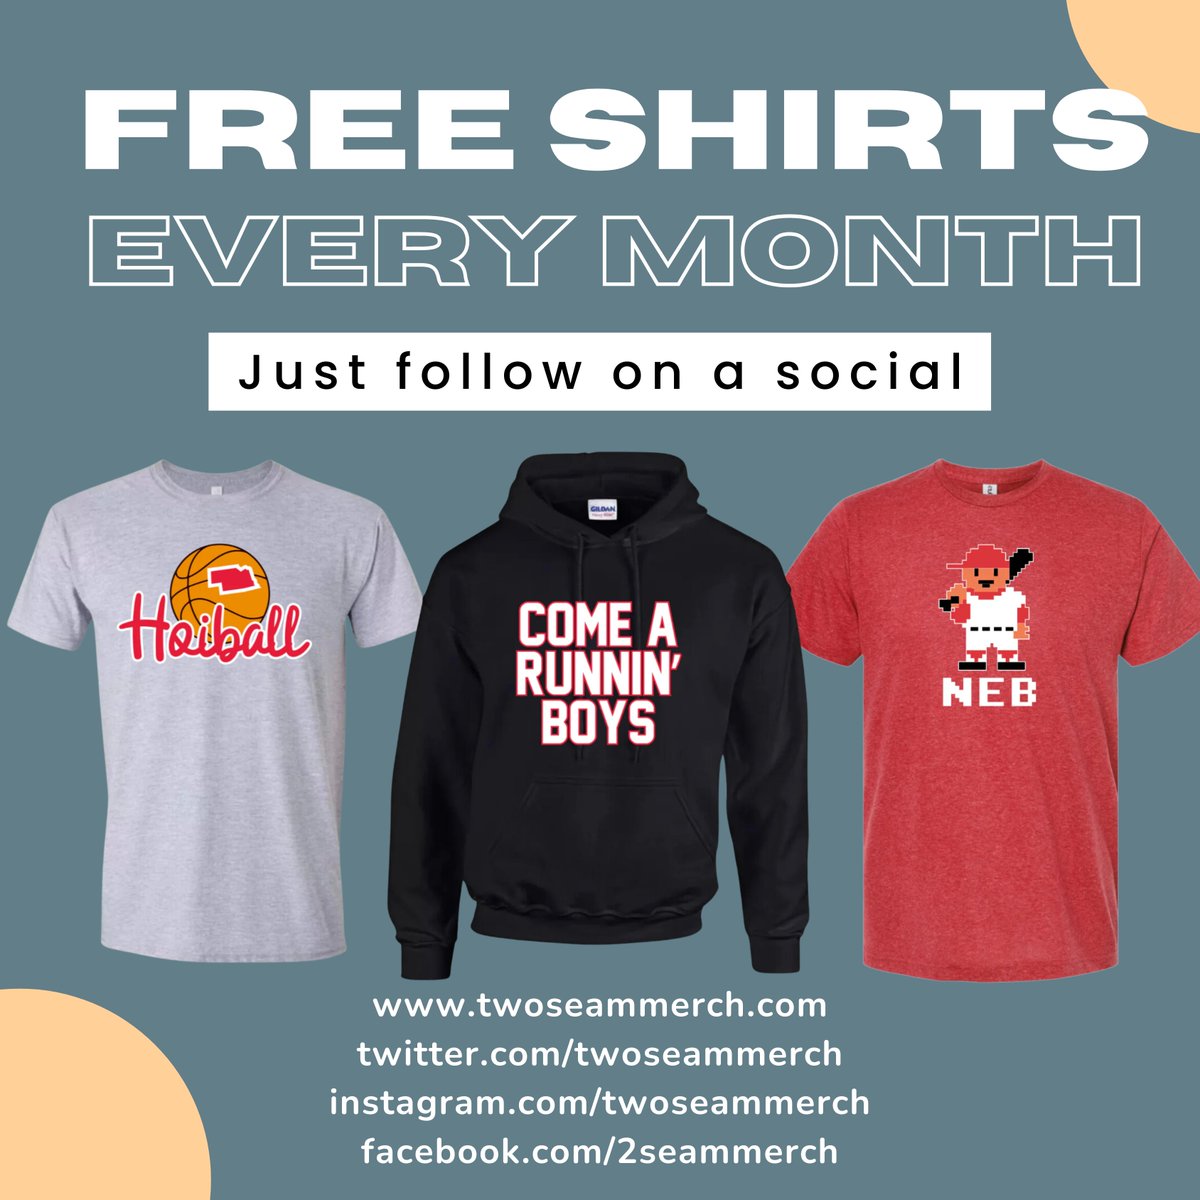 Every month I will pick out of the list of followers on socials and giveaway a shirt. Just for fun and as a thank you for following. Once you follow the first time, you're in the drawing every month. I'll draw it during the first week of every month. Thanks for following! #GBR